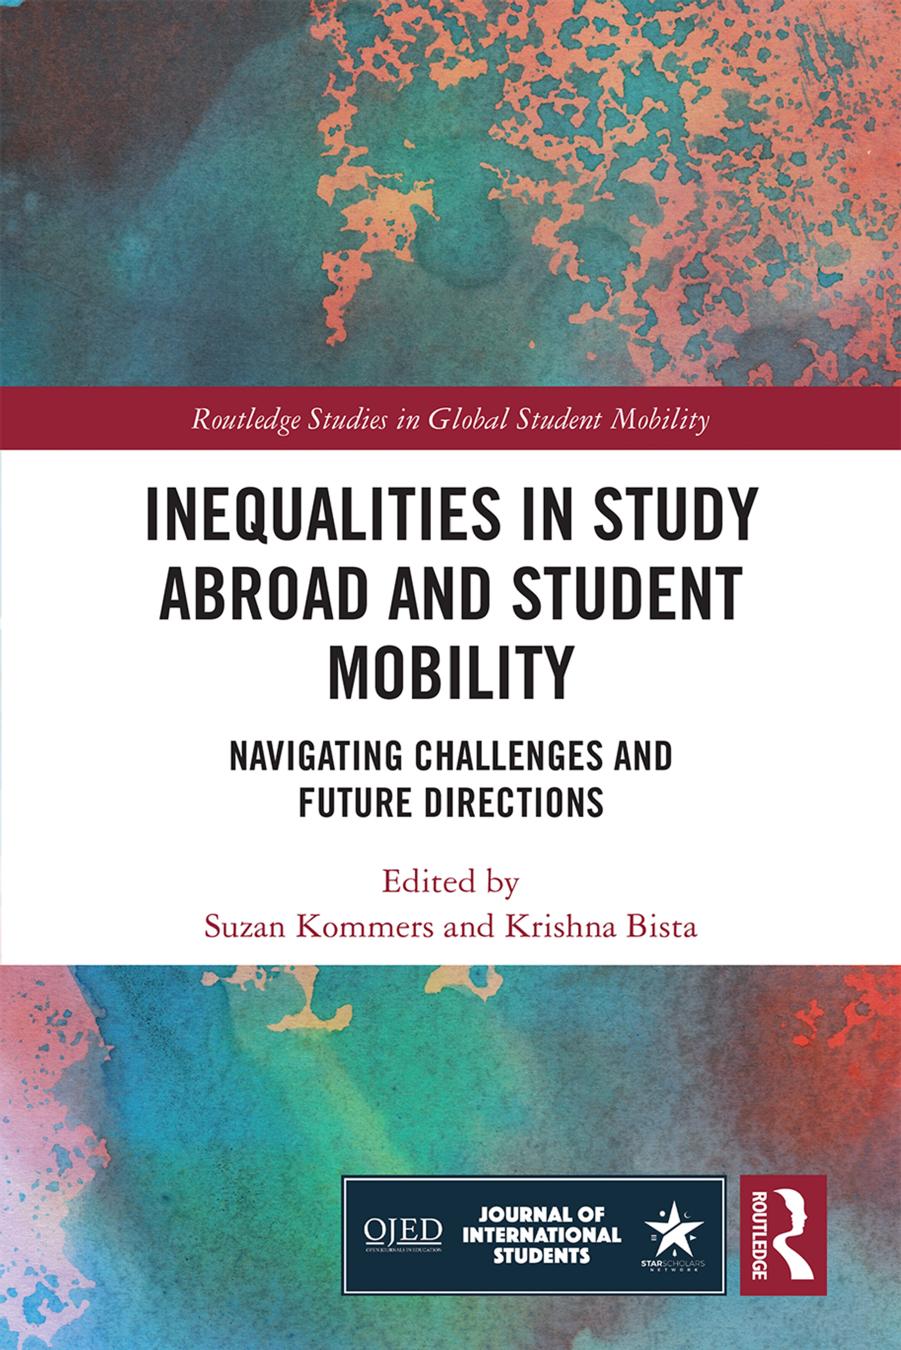 (eBook PDF)Inequalities in Study Abroad and Student Mobility; Navigating Challenges and Future Directions  by Suzan Kommers & Krishna Bista